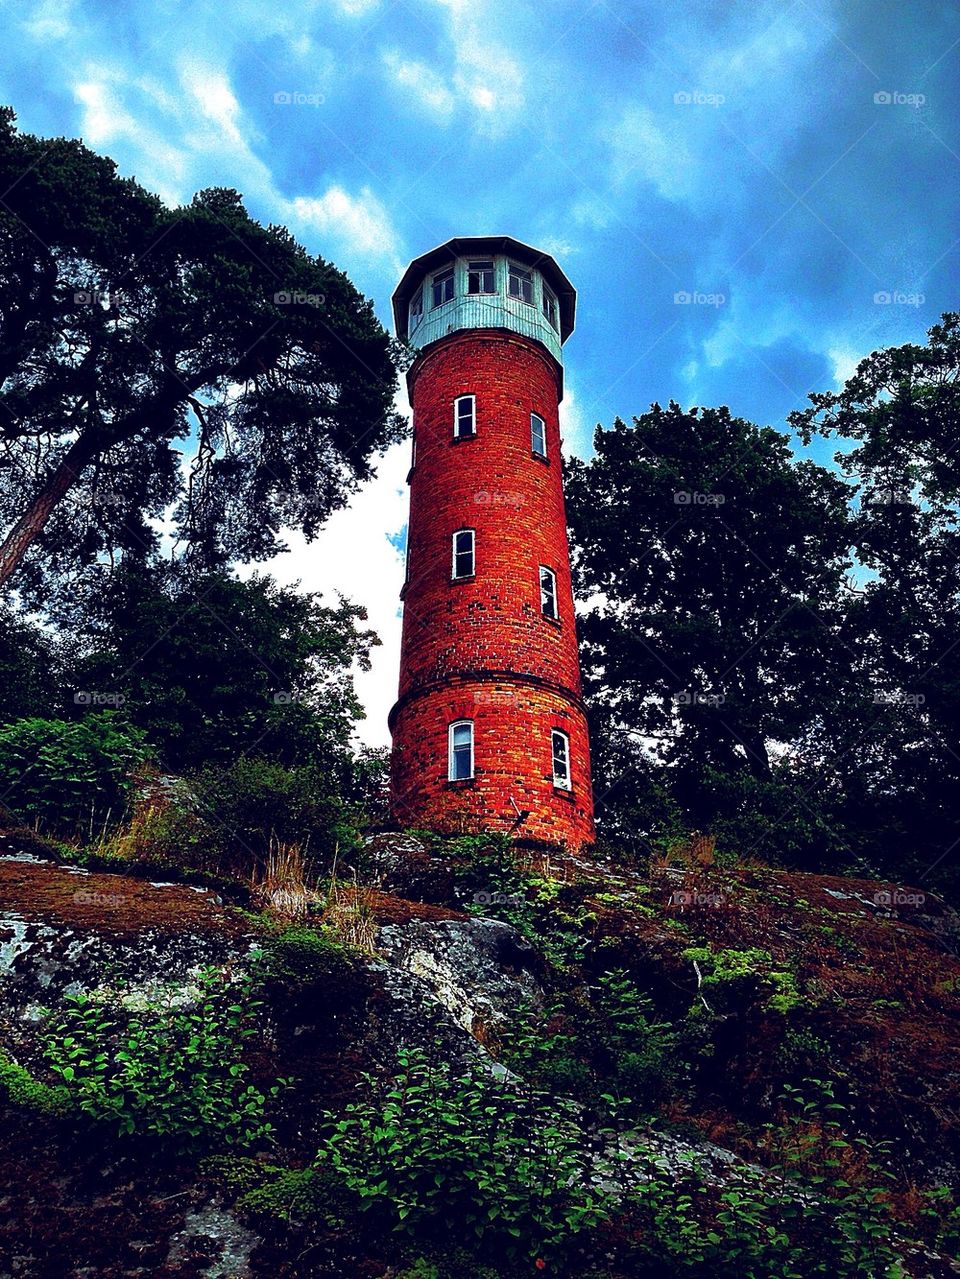 The lighthouse on top of the Hill